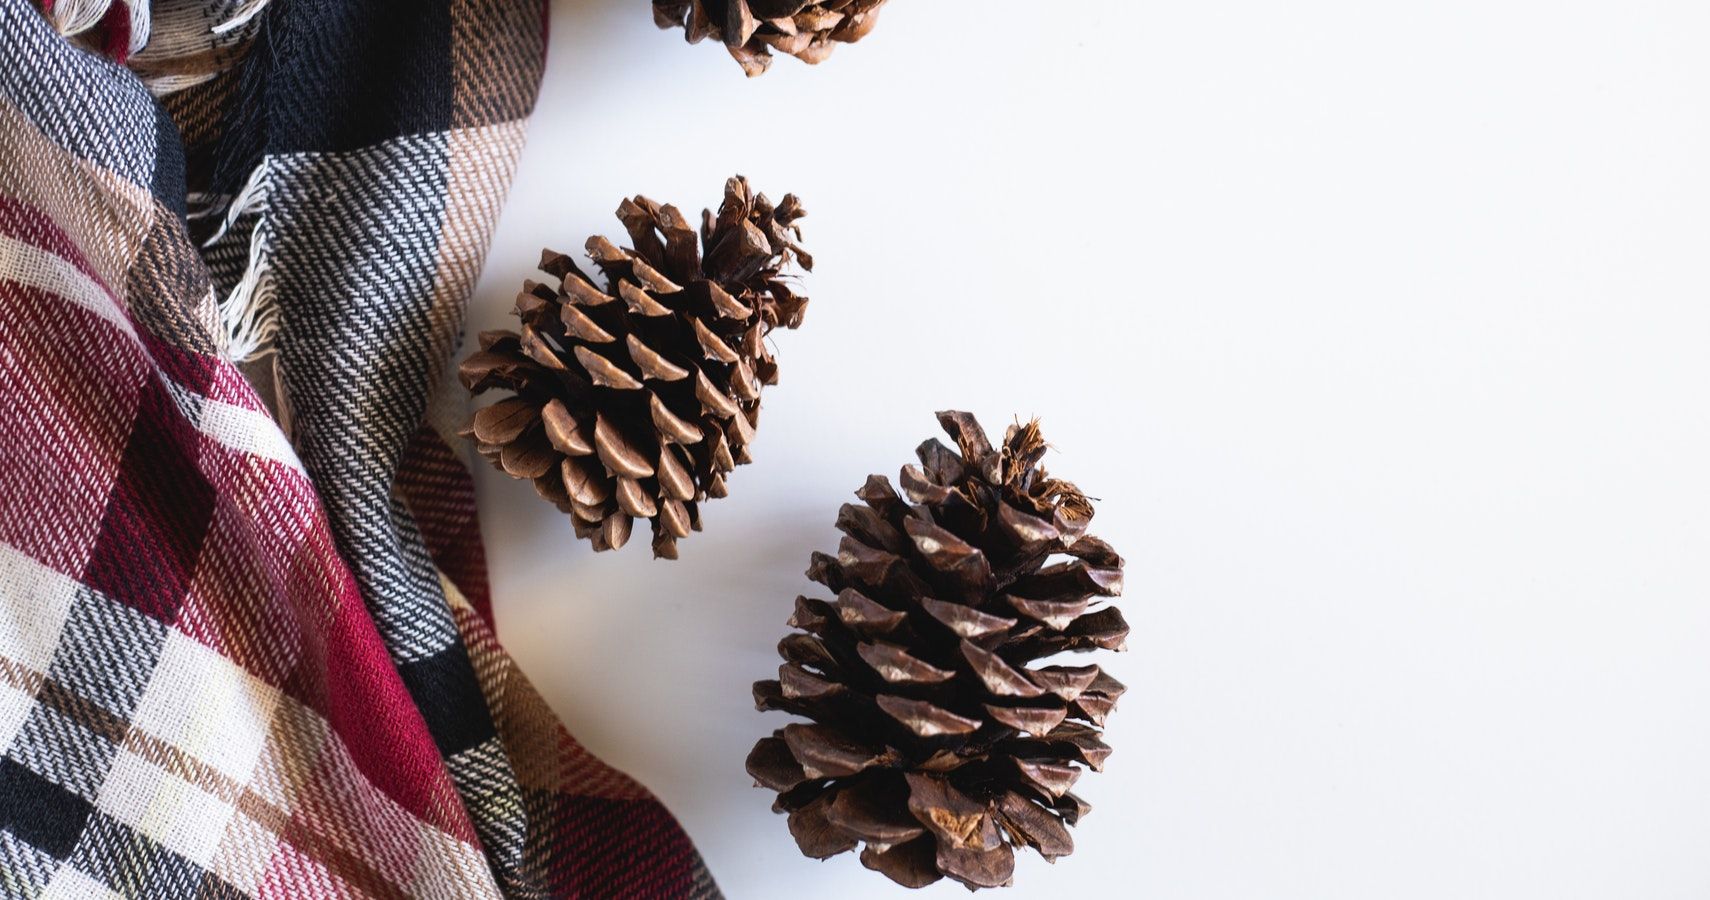 Easy Crafts To Do With Toddlers Using Pine Cones